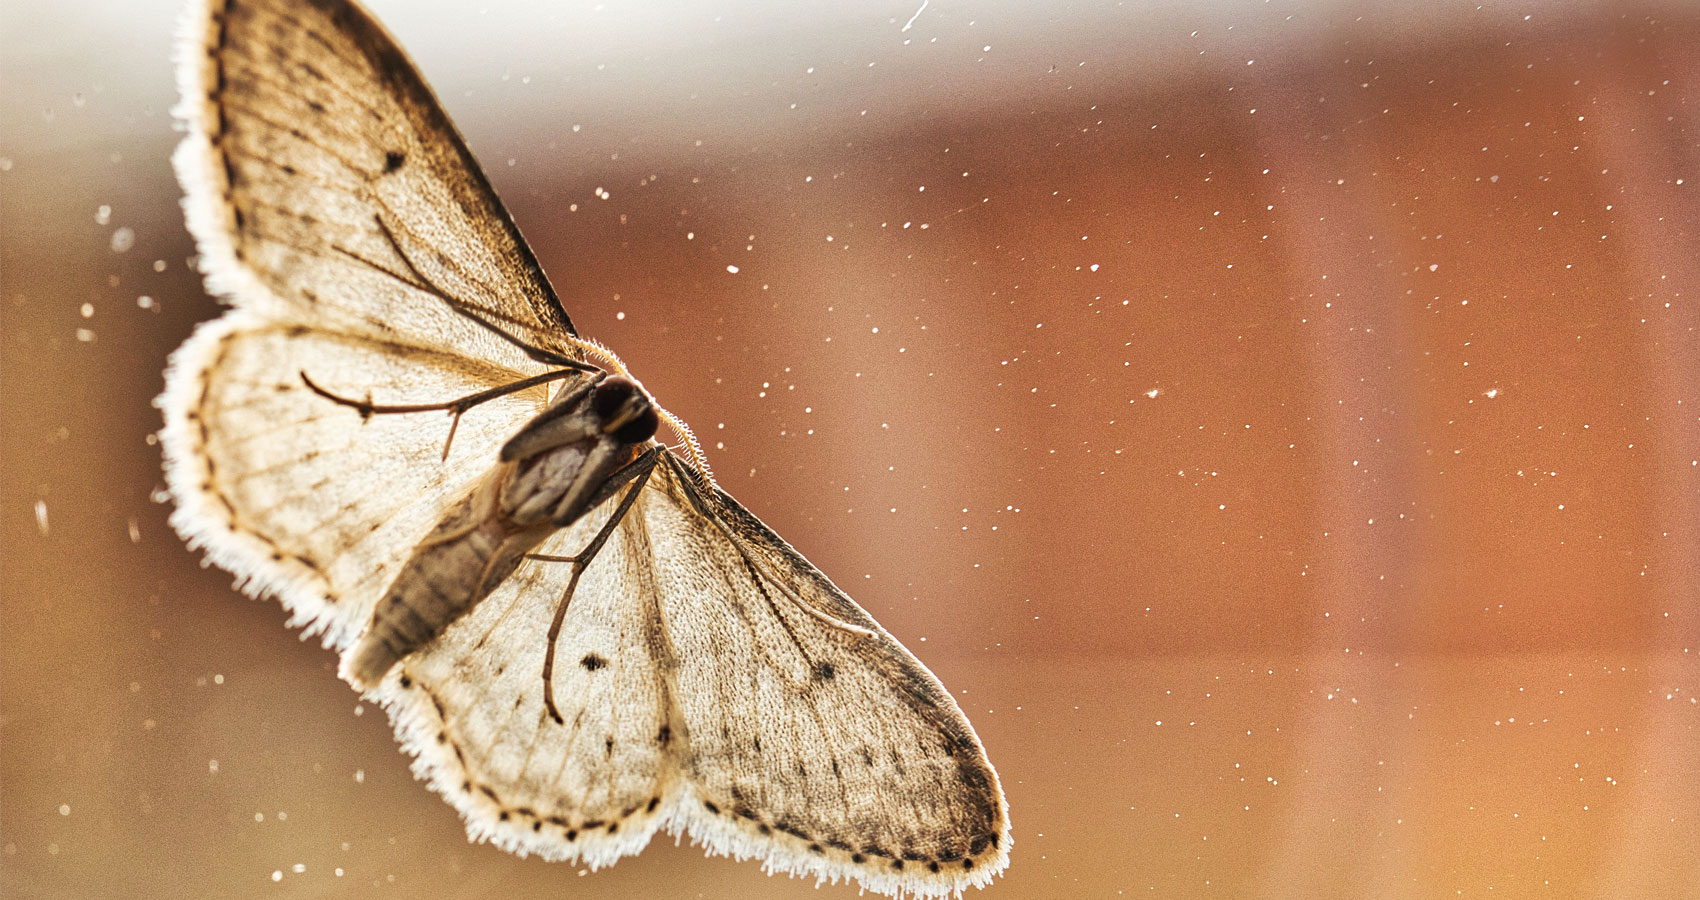 Moth - A Sonnet, poetry written by Polly Oliver at Spillwords.com